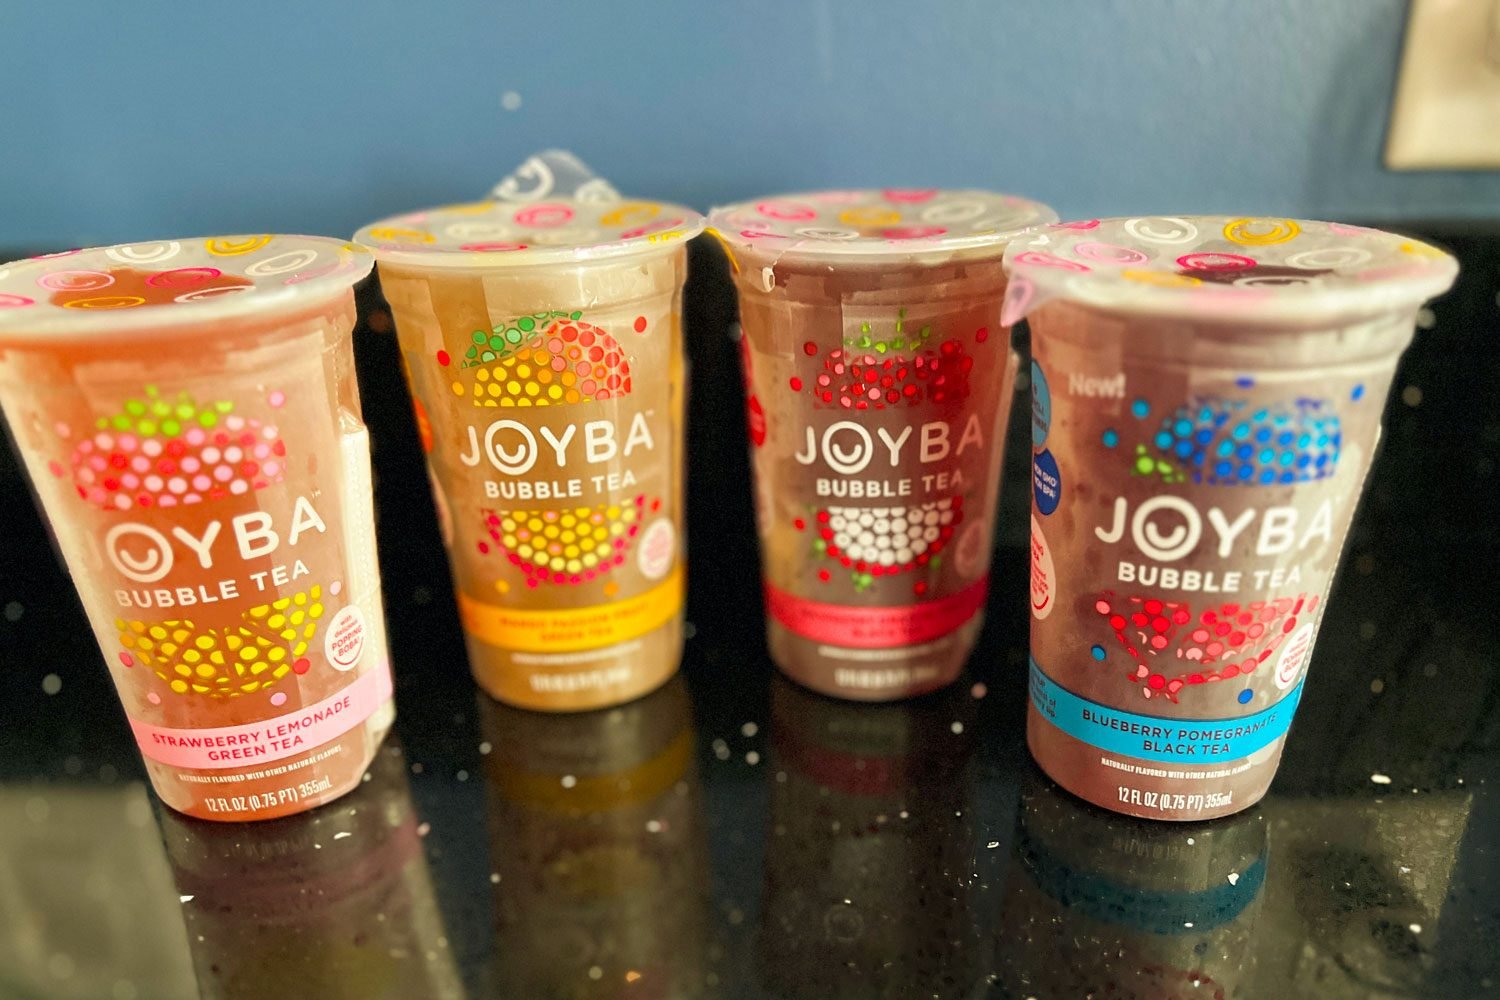 https://www.tasteofhome.com/wp-content/uploads/2023/09/FT-Joyba-Bubble-Tea-Gael-Fashingbauer-Cooper-for-TOH-Resize-Recolor-Crop-DH-TOH.jpg?fit=700%2C1000